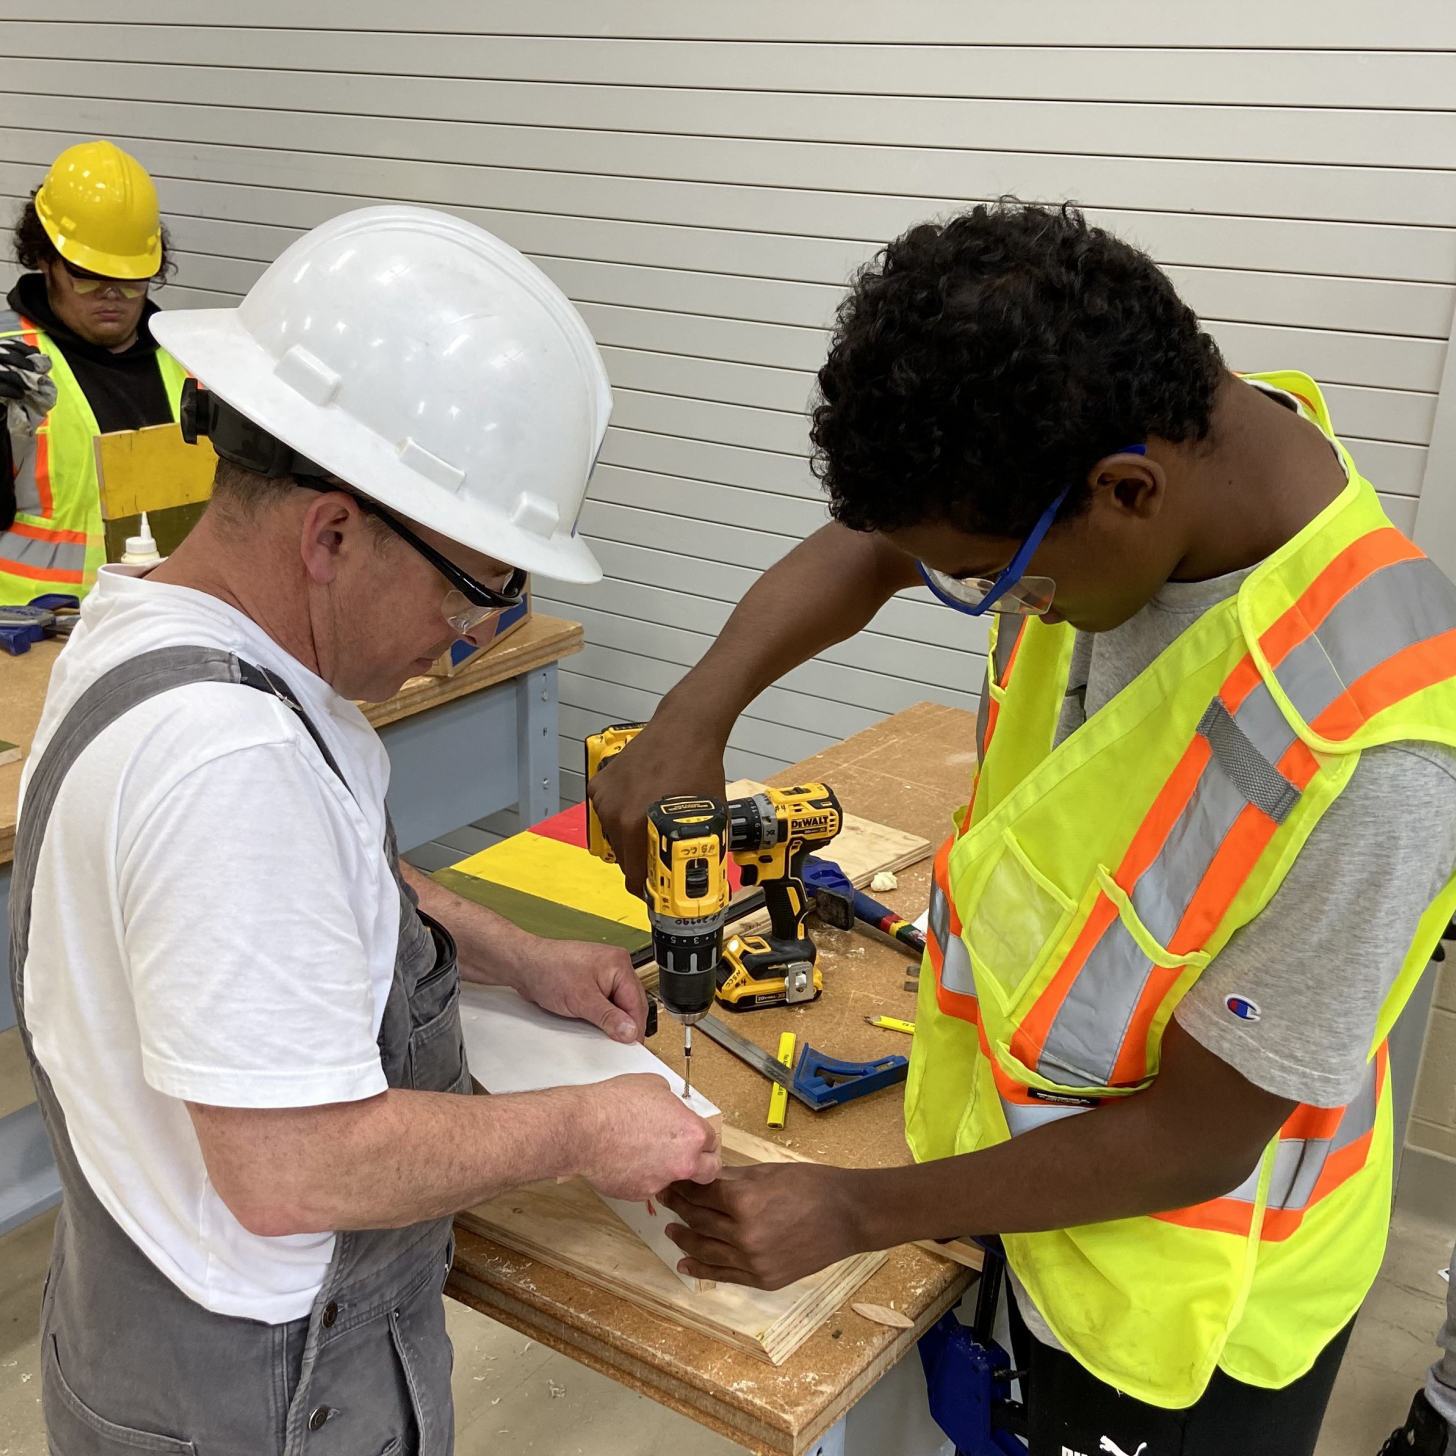 An instructor helps a student learning carpenter skills.